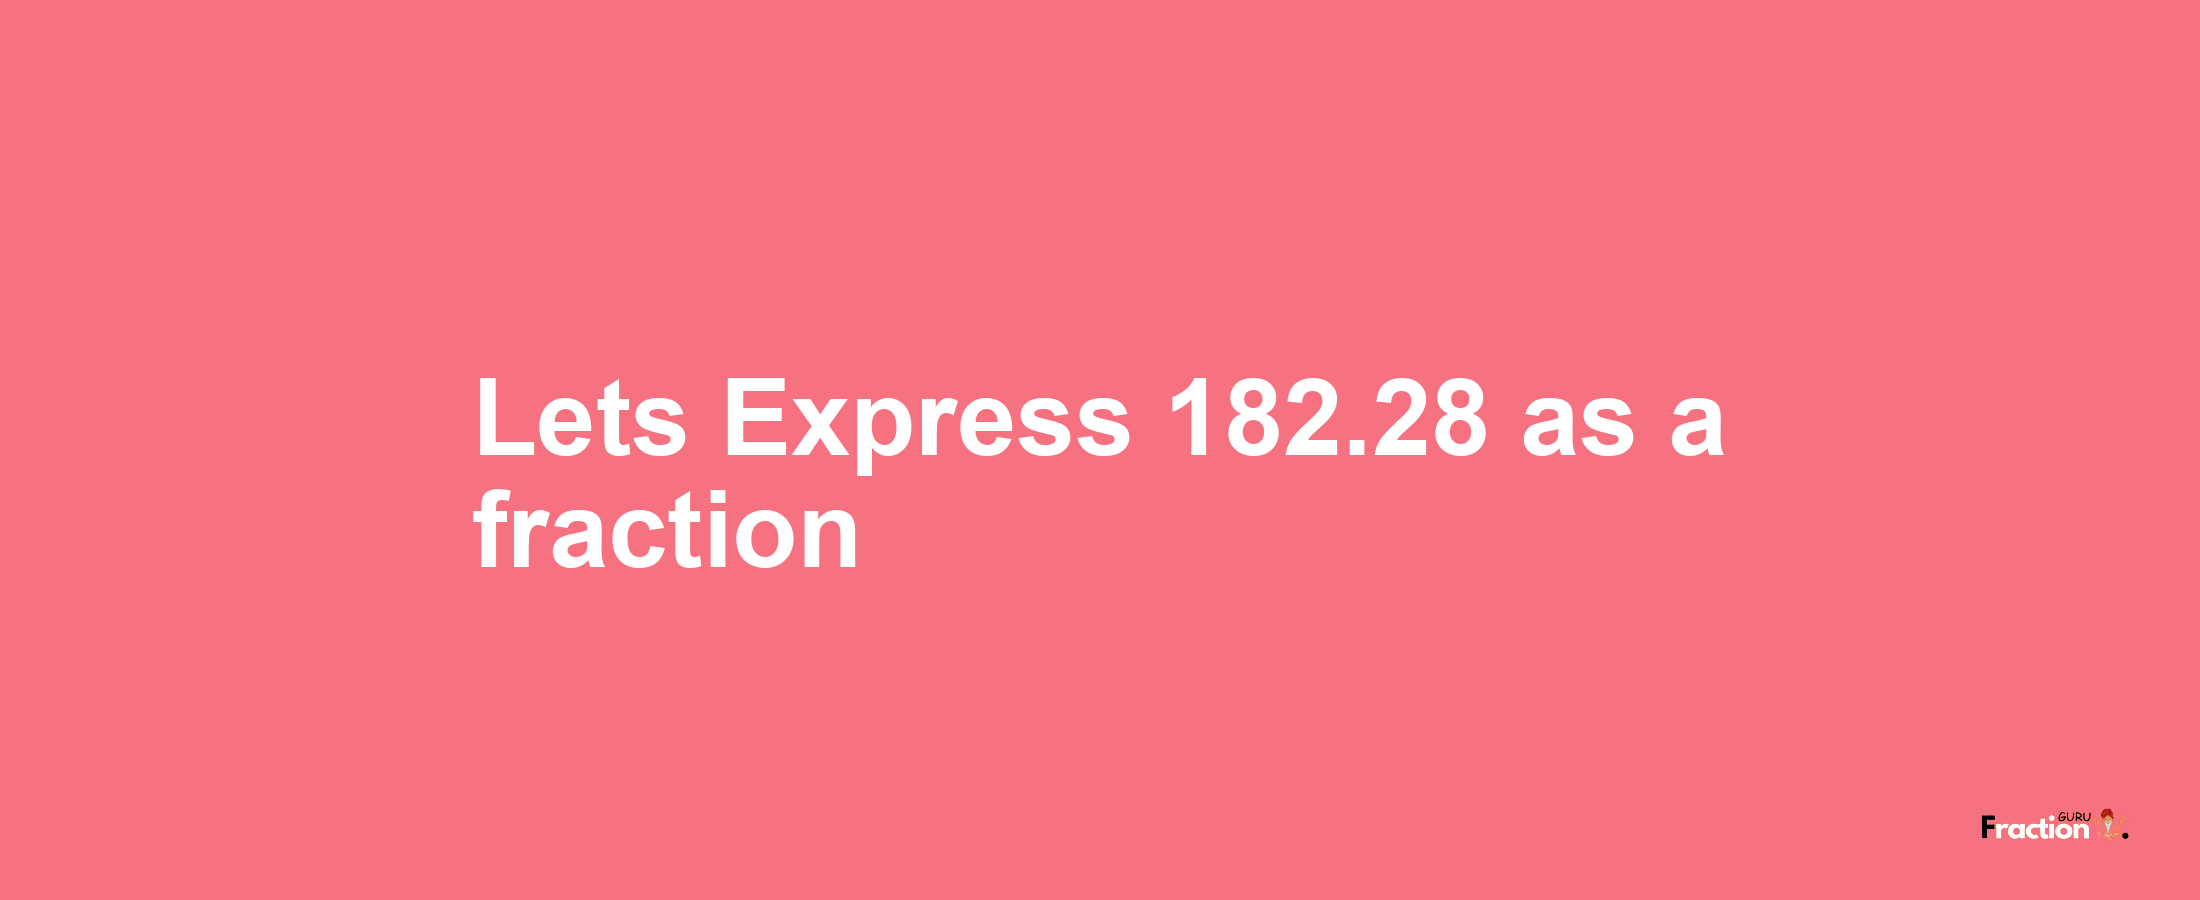 Lets Express 182.28 as afraction